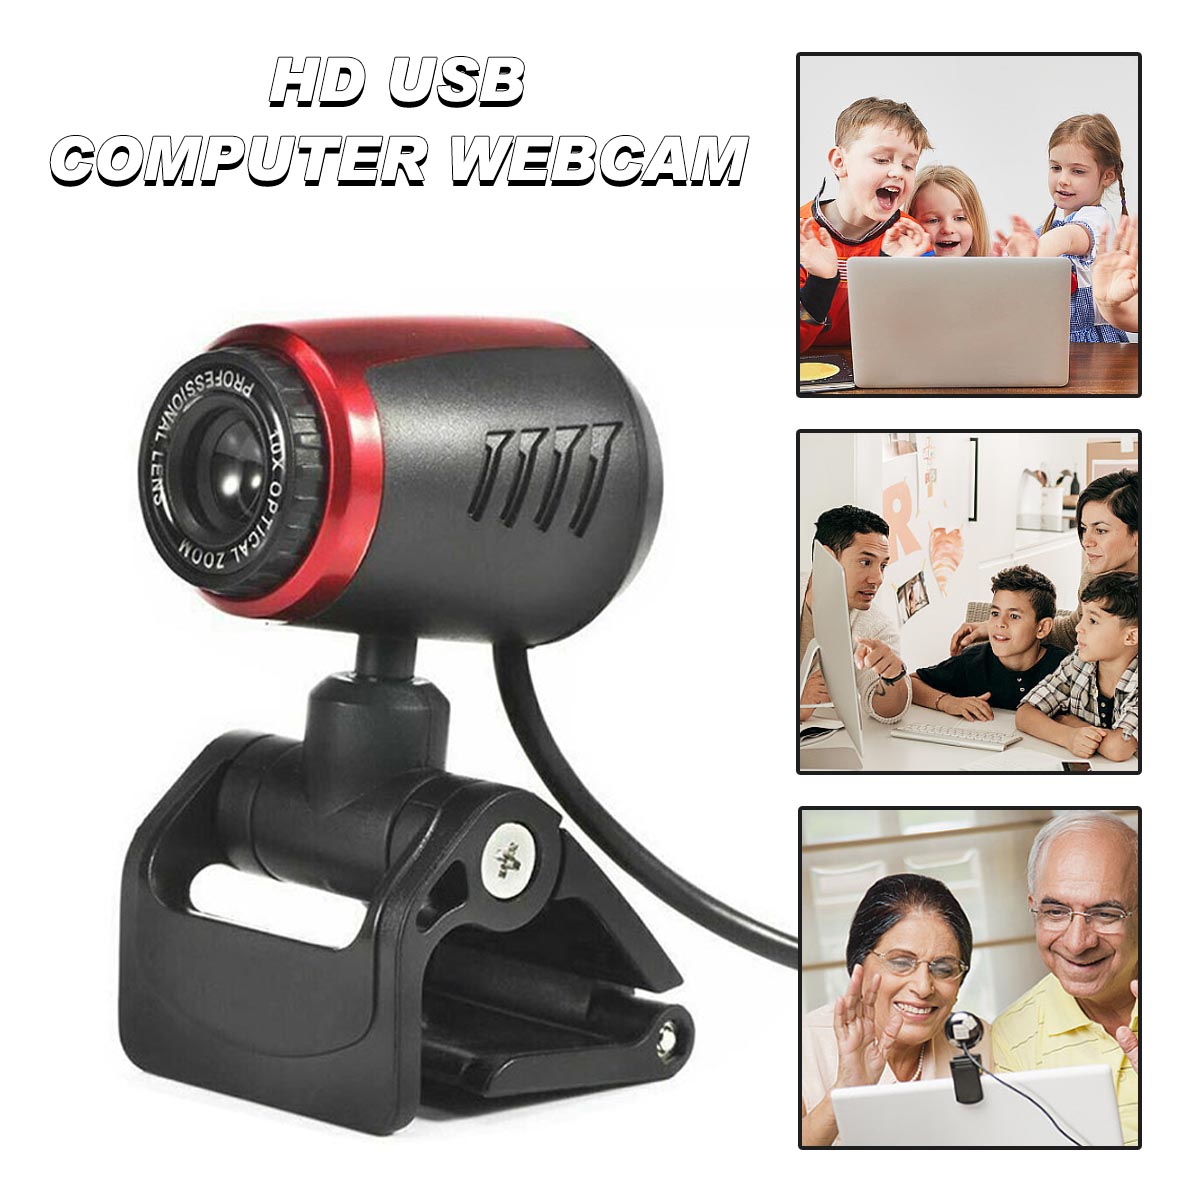 UnVug New 1080P Webcam USB Computer Web Camera With Microphone For PC